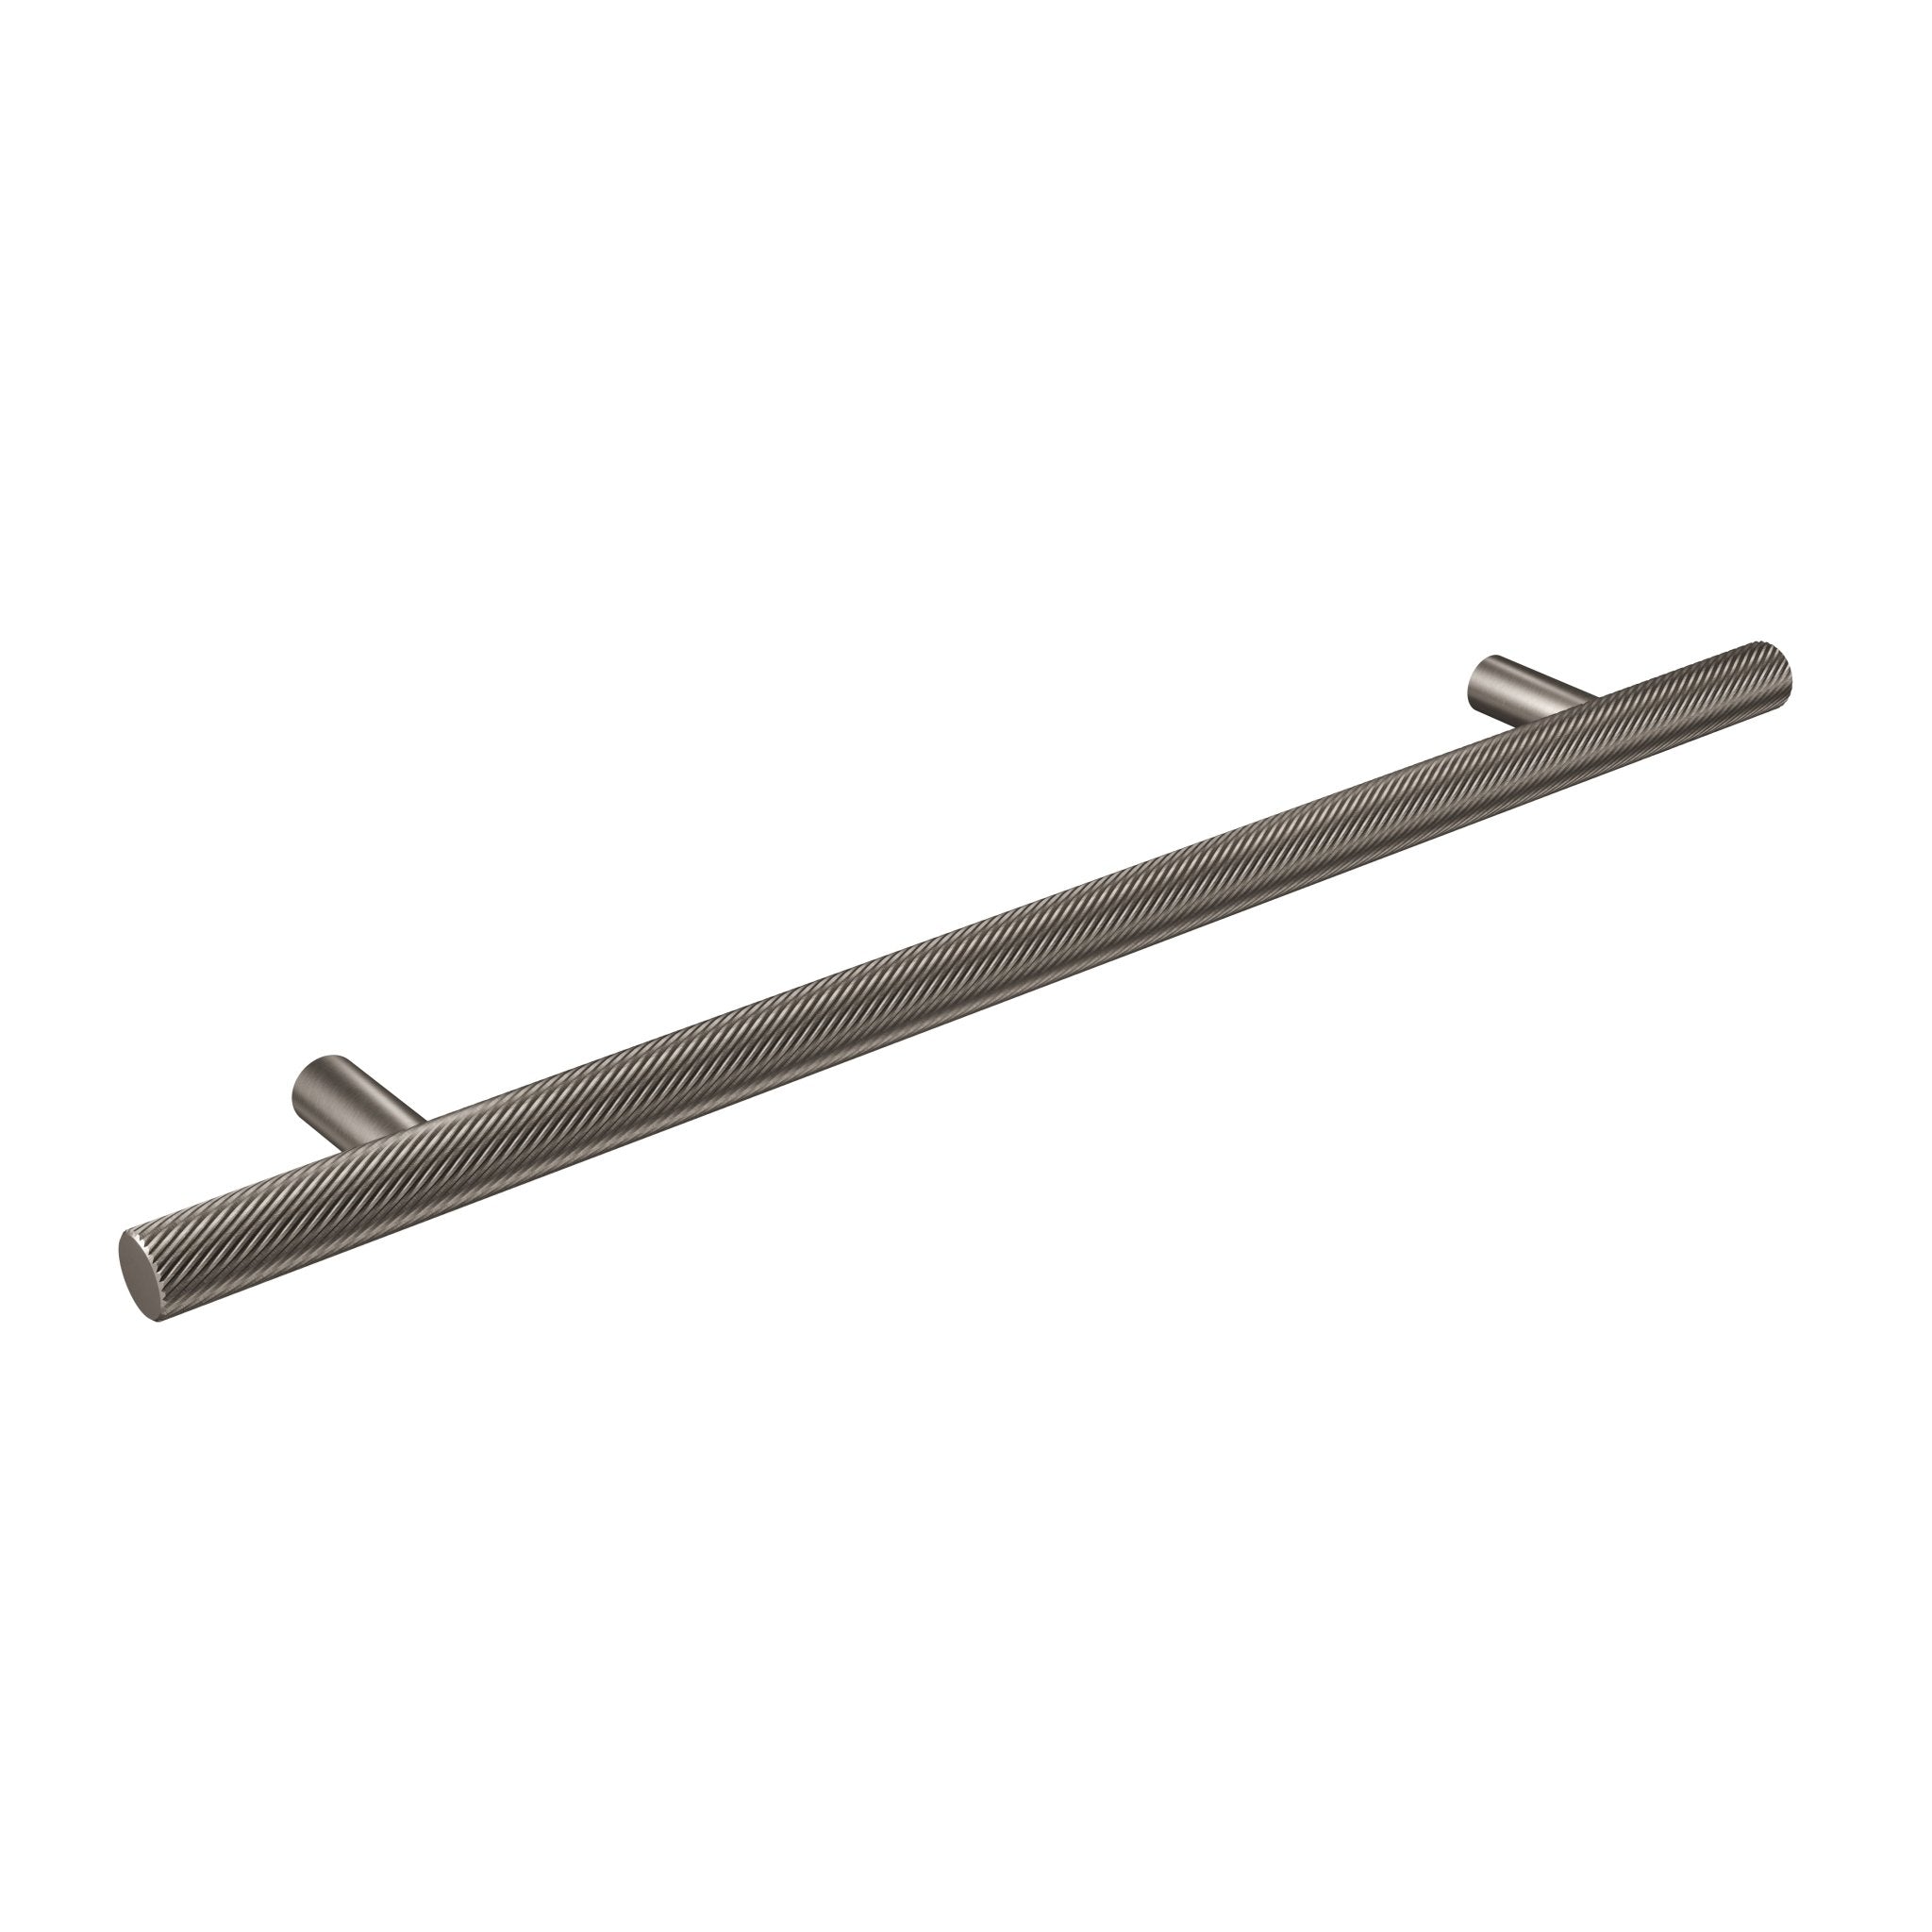 Spiral 12mm Pull Handle-Industrial Nickel-300mm-The Hairpin Leg Co.